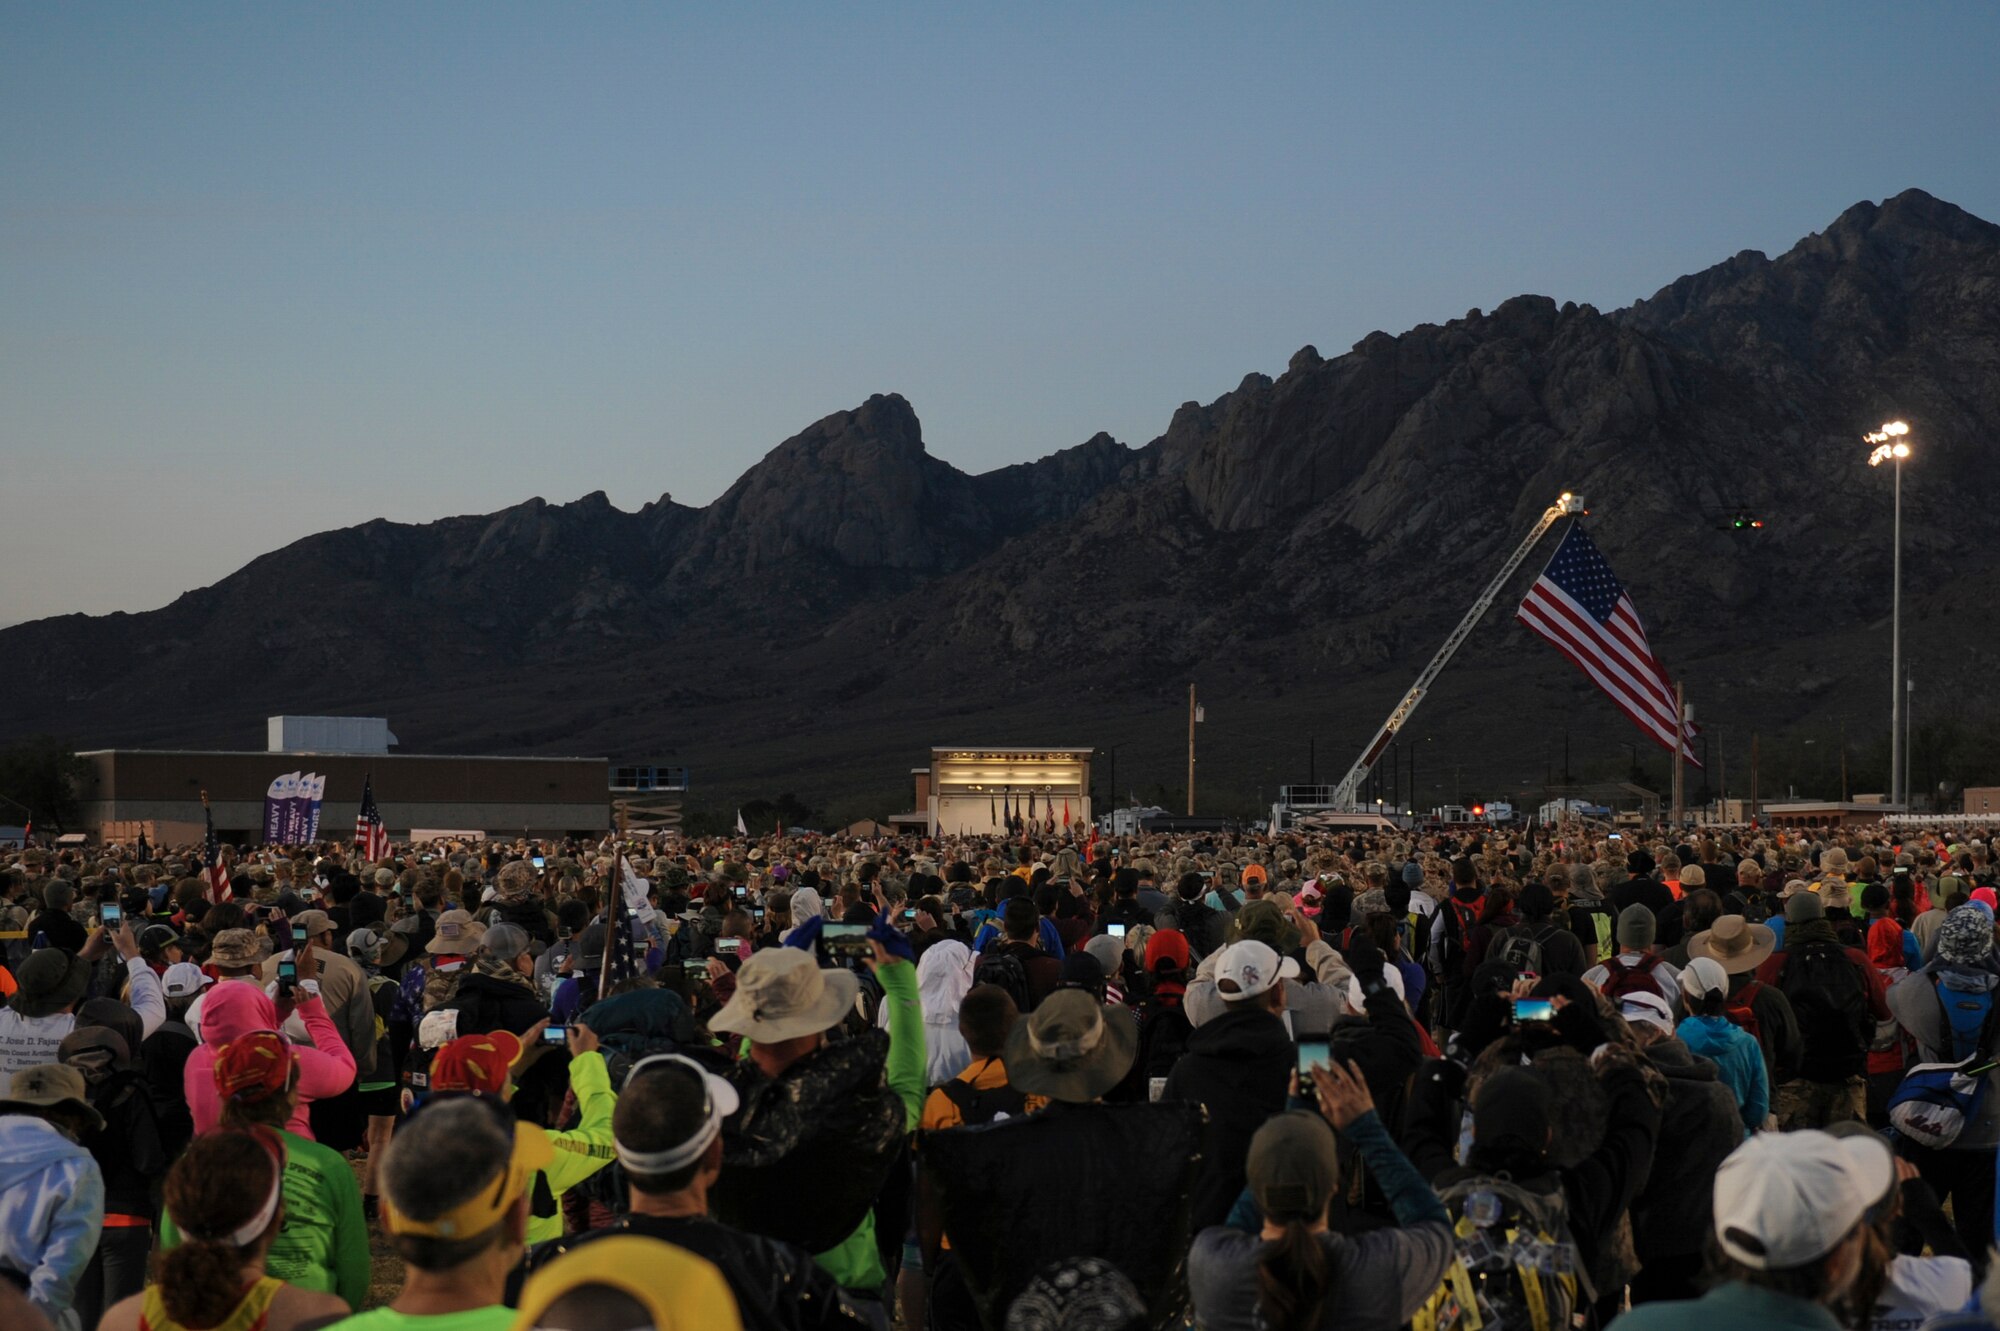 More than 6,600 military members, civilians, volunteers and veterans gather to honor World War II survivors prior to the start of the 2016 Bataan Memorial Death March at White Sands Missile Range, N.M., March 20, 2016. Two teams from Little Rock Air Force Base, Ark., participated in this year’s memorial march. (U.S. Air Force photo/Senior Airman Harry Brexel)